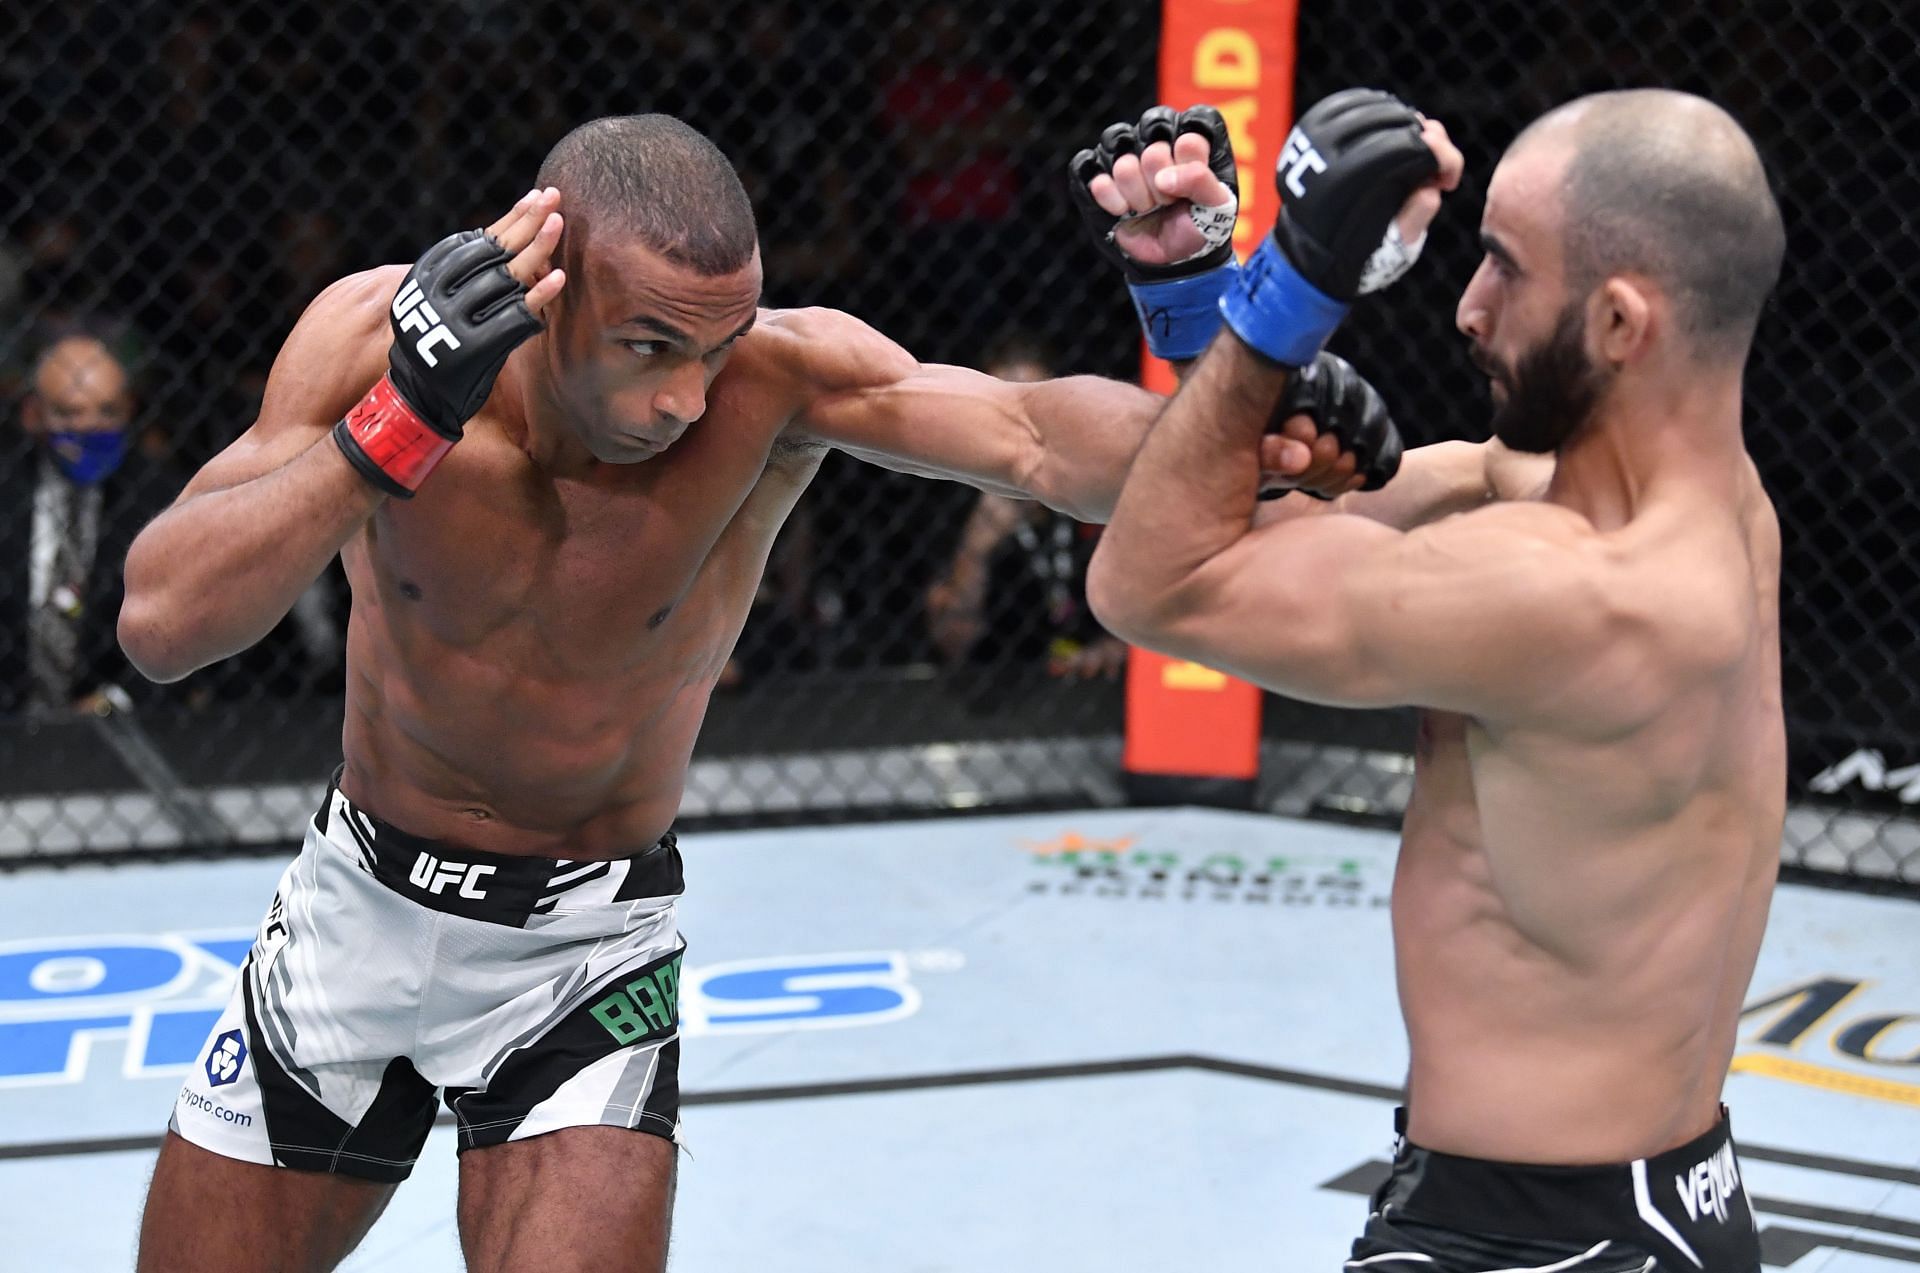 Edson Barboza will be desperate for a win over prospect Bryce Mitchell this weekend